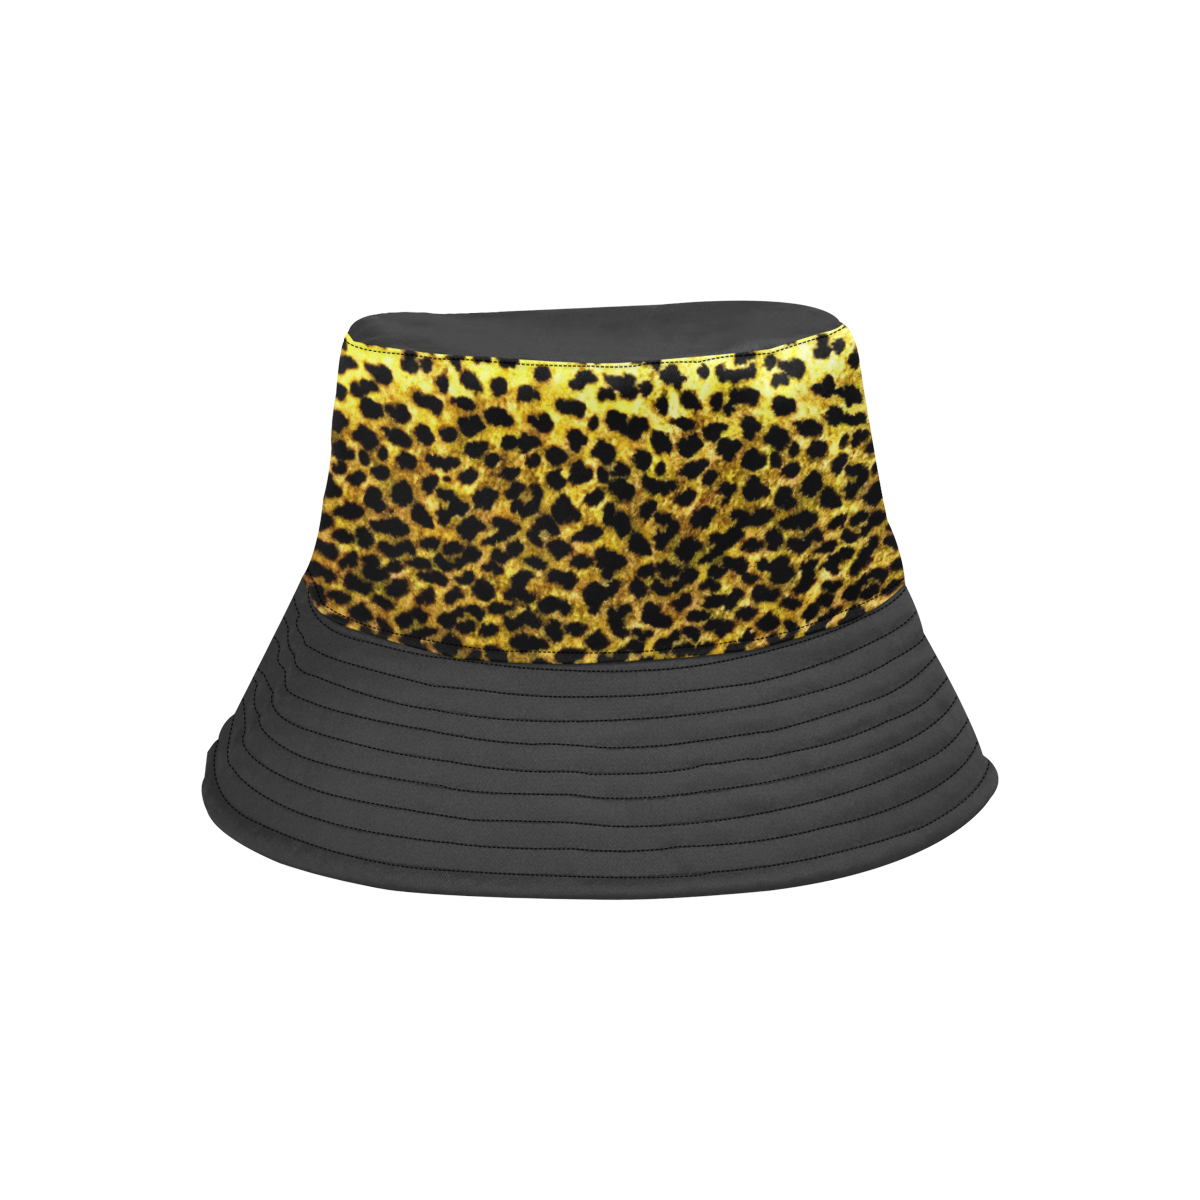 LEOPARD faux fur animal print All Over Print Bucket Hat